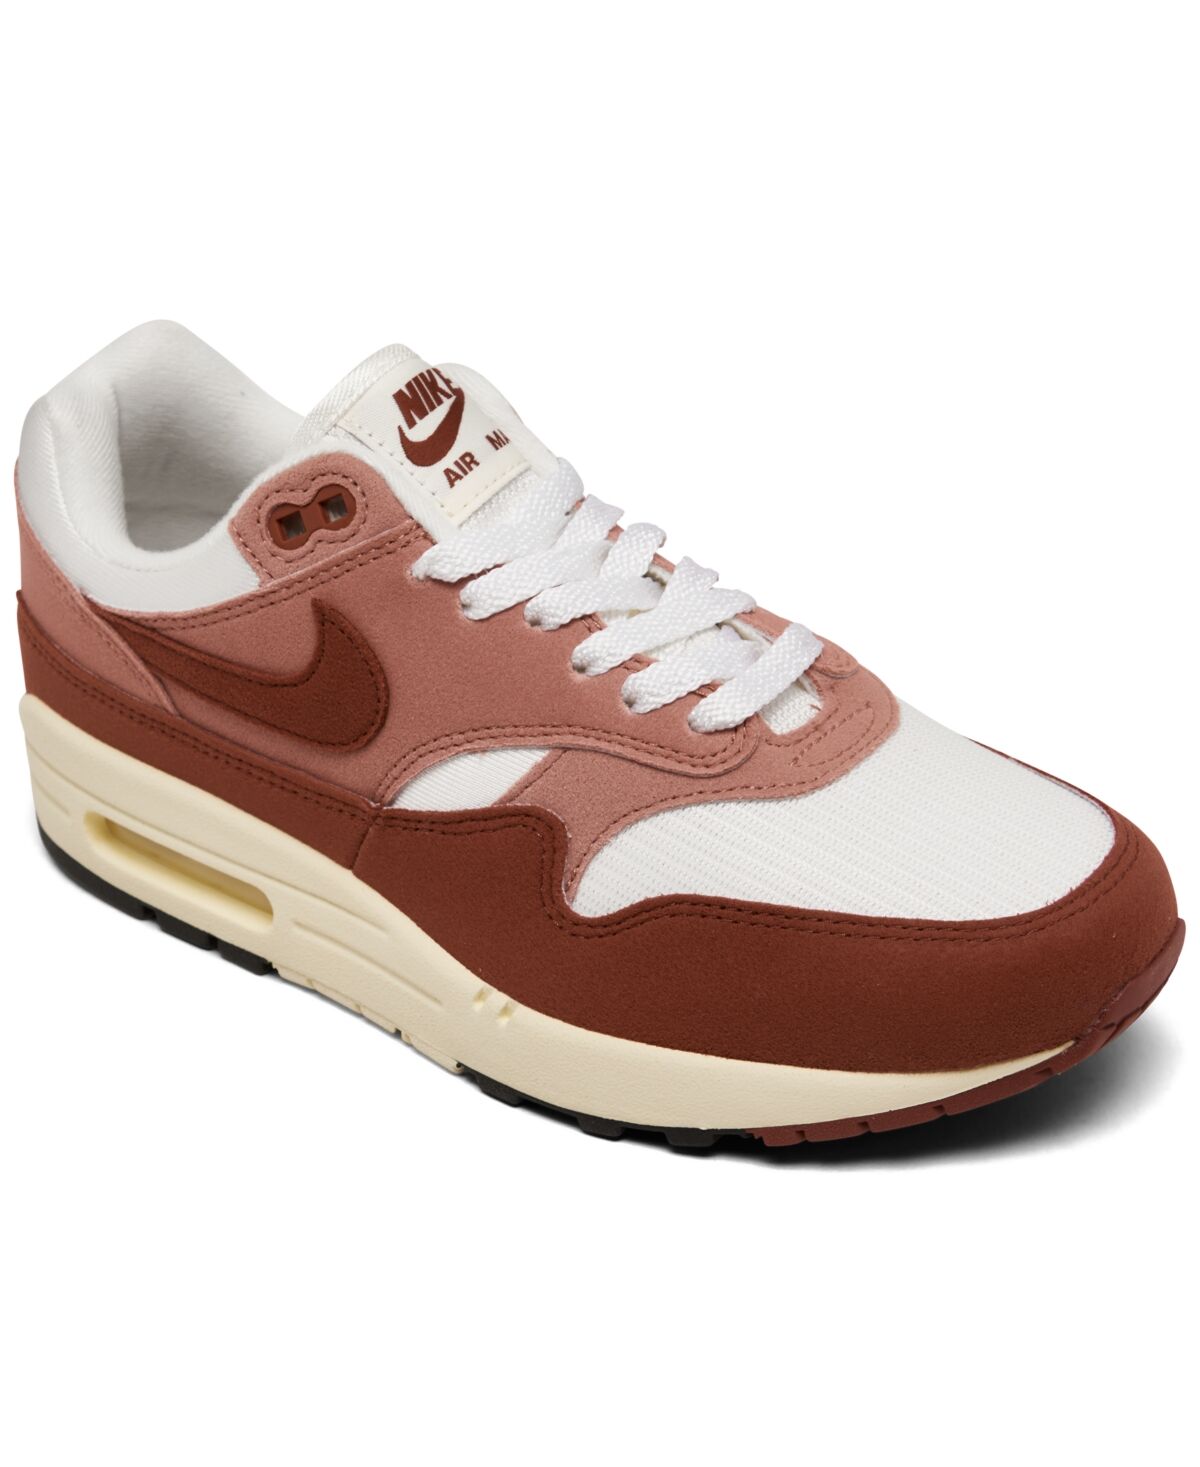 Nike Women's Air Max 1 '87 Casual Sneakers from Finish Line - Sail, Cedar, Red Stardust